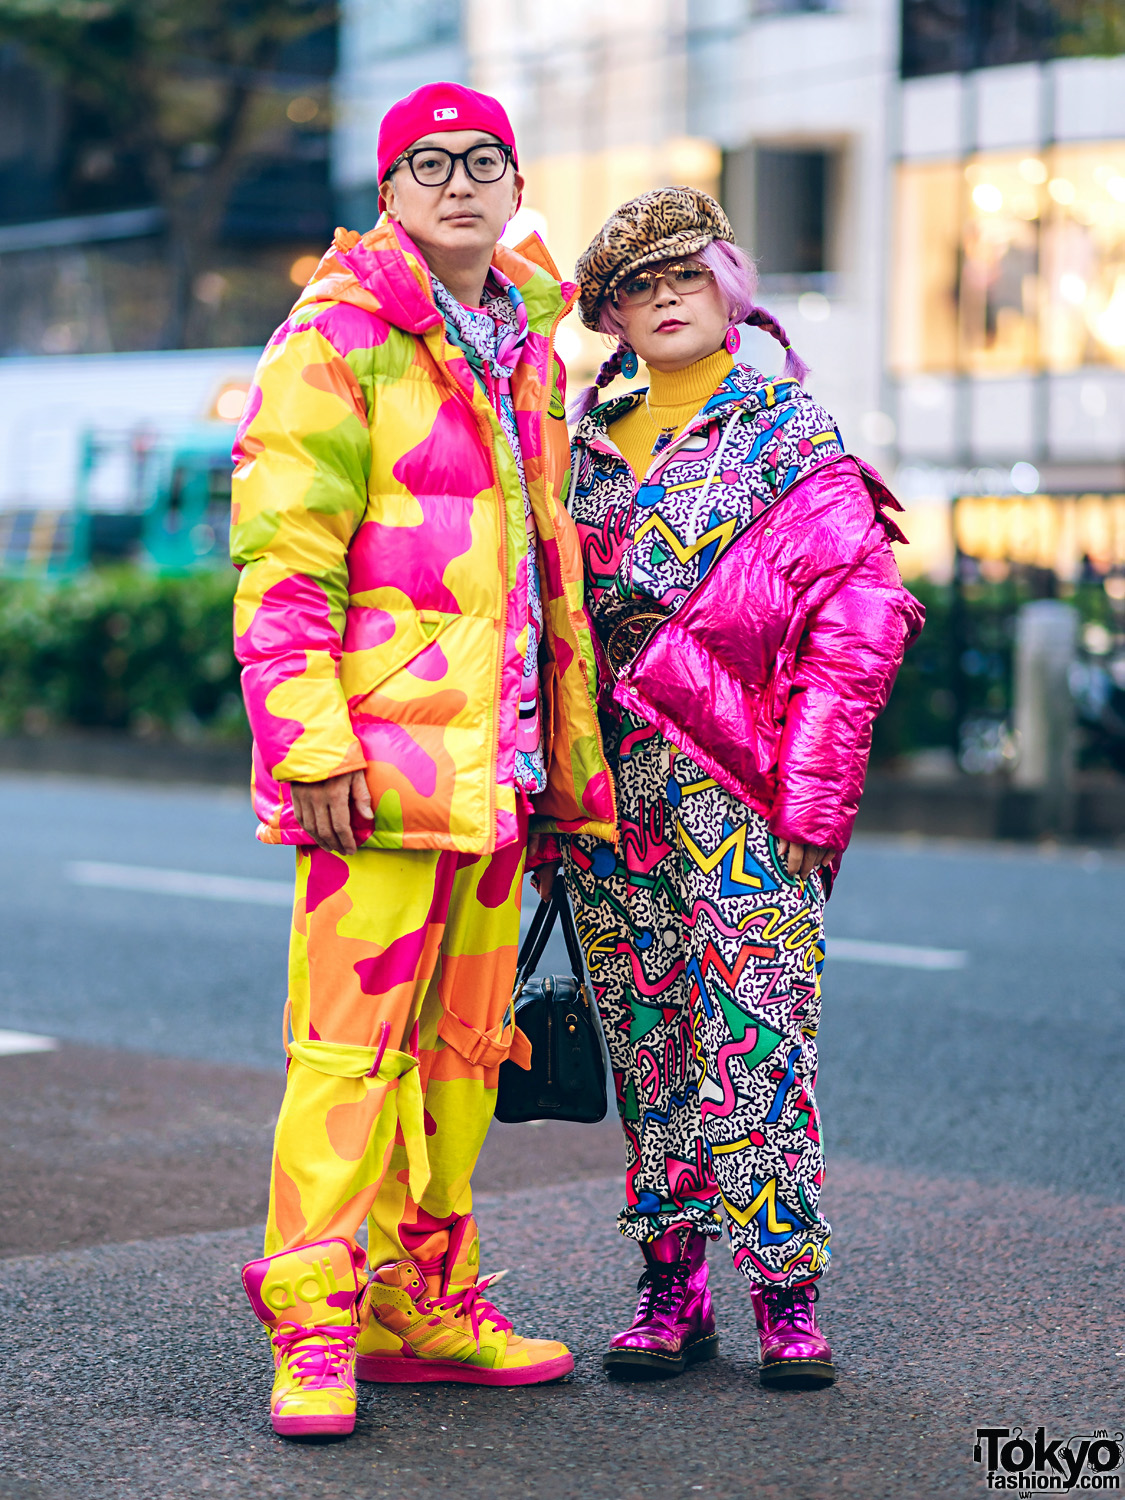 Harajuku Duo in Colorful Winter Street Styles w/ Adidas x Jeremy Scott Camouflage Print, Kobinai Puffer Jacket, Dr. Martens Metallic Boots, Galaxxxy Hoodie, Nuezzz Jumpsuit & MCM Bag